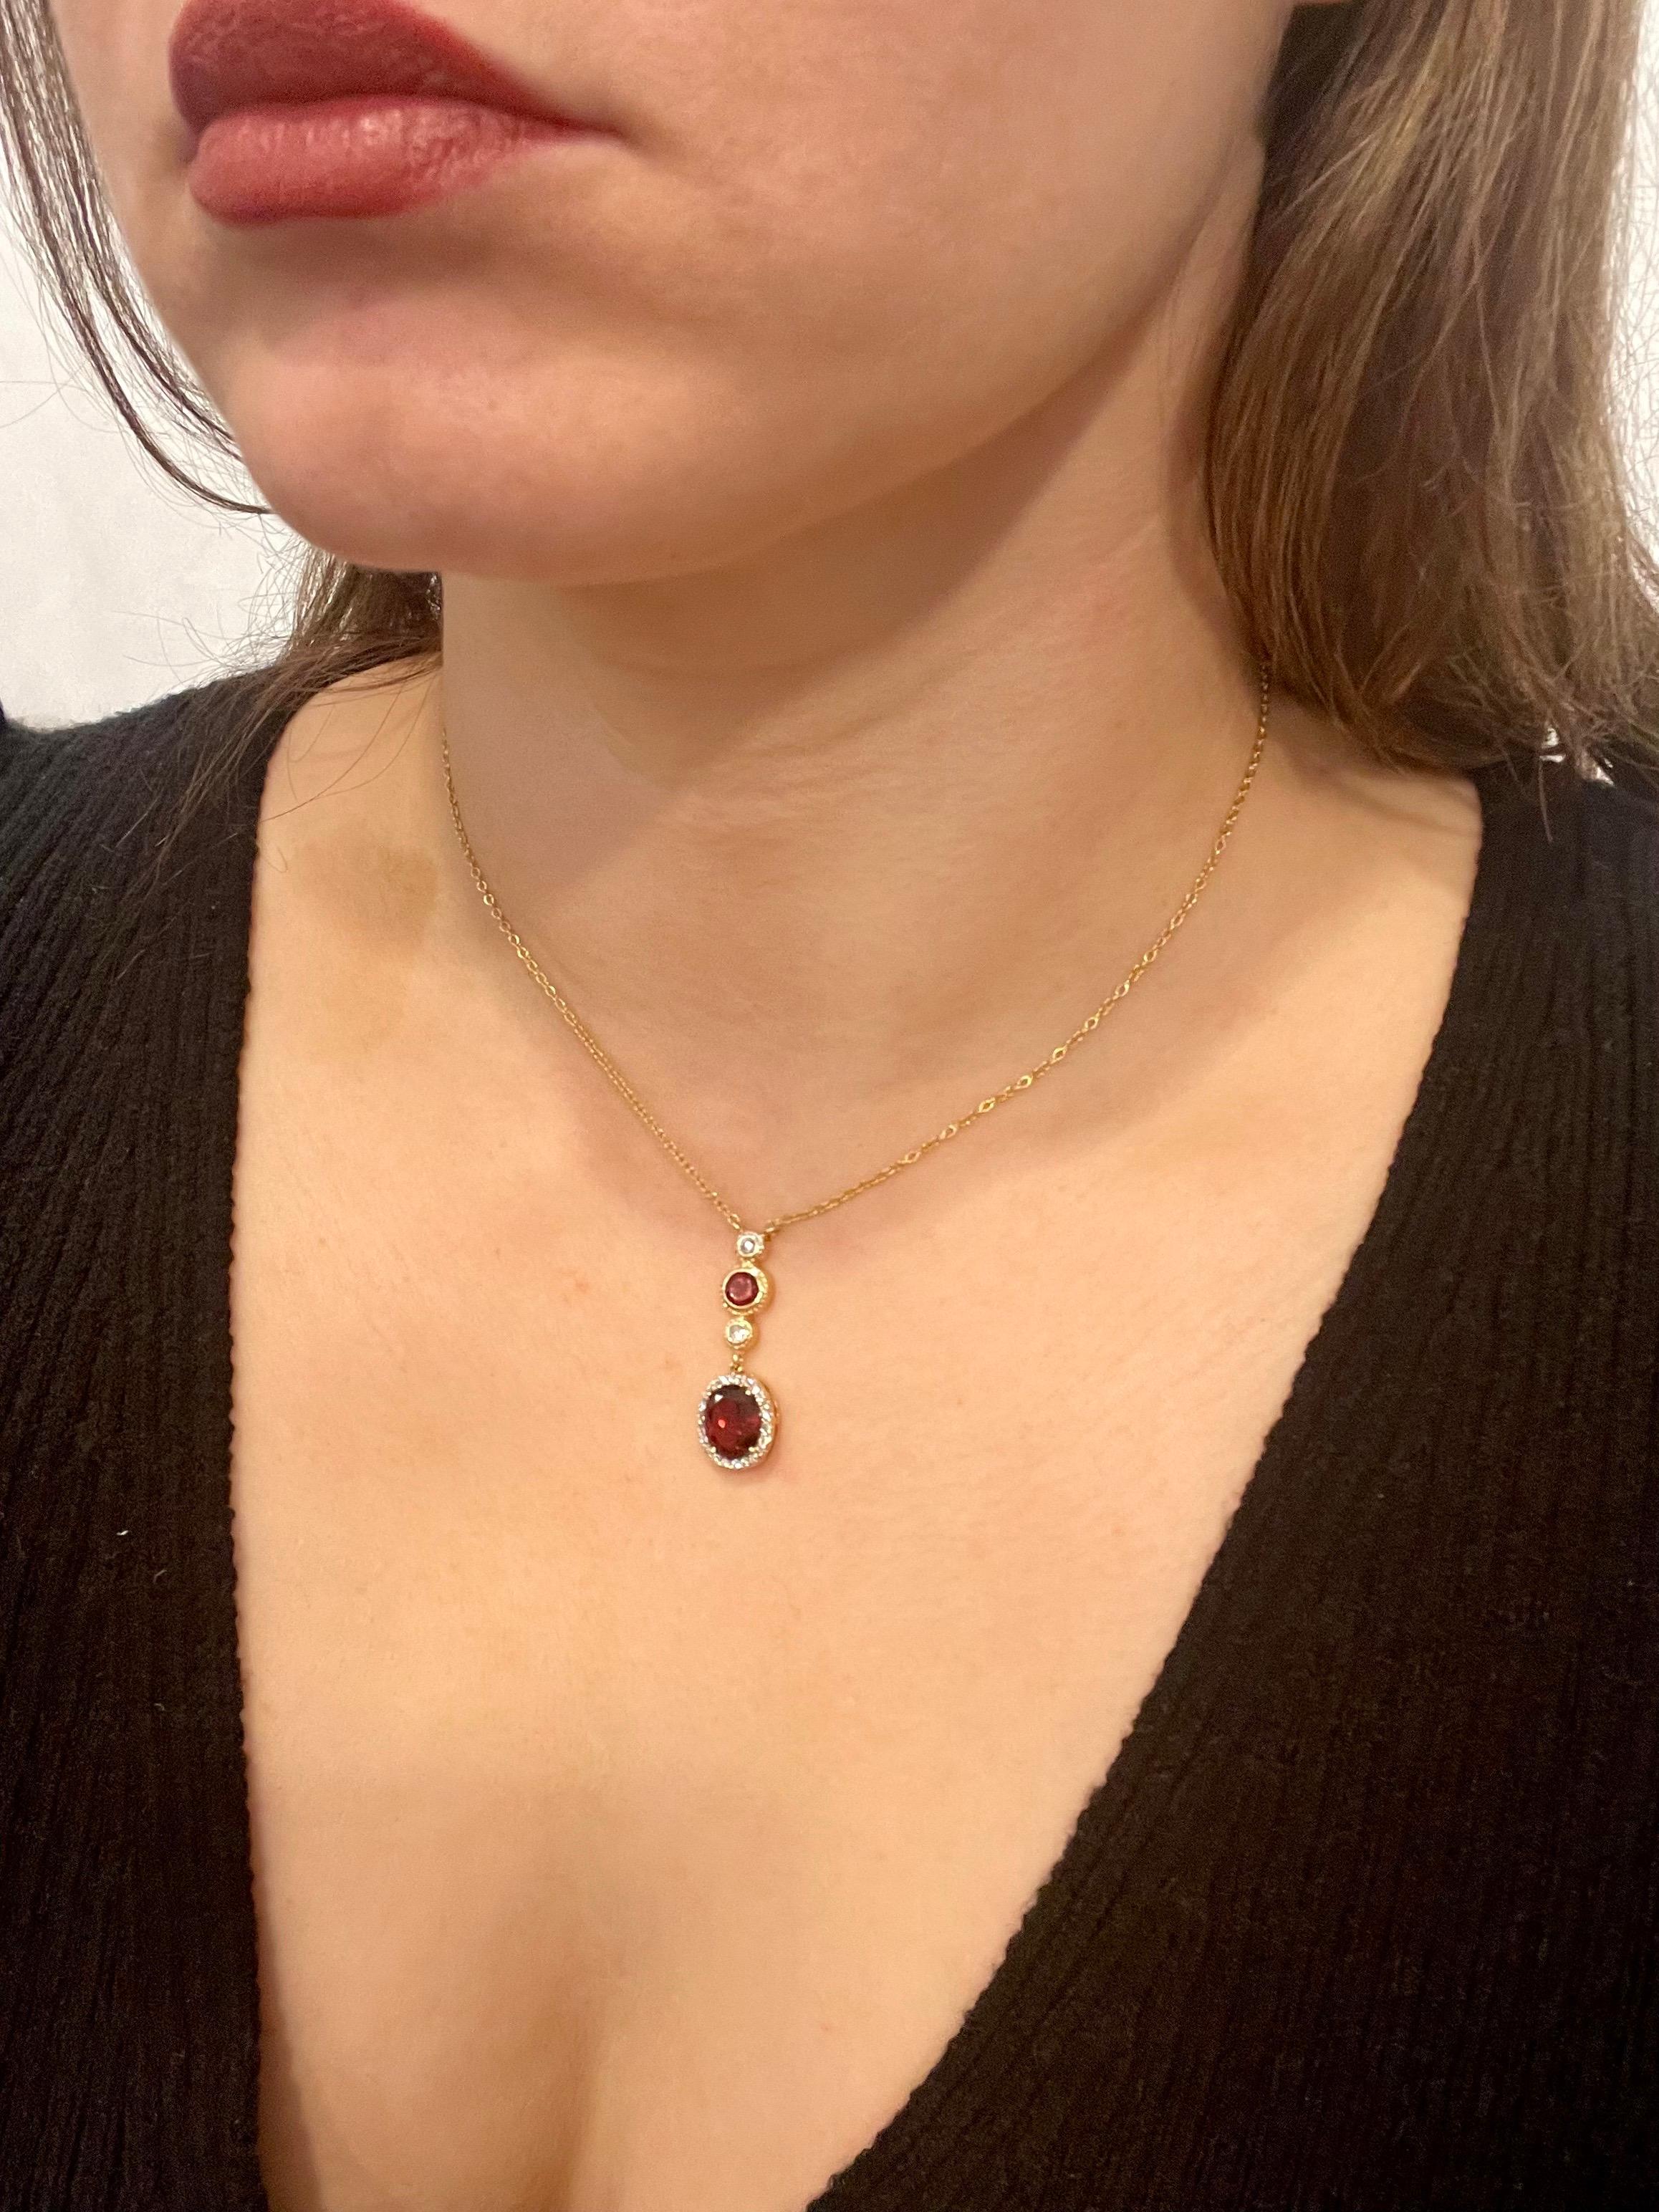 6 Carat Oval Shape Garnet and 0.6 Carat Diamond Necklace in 14 Karat Yellow Gold For Sale 9